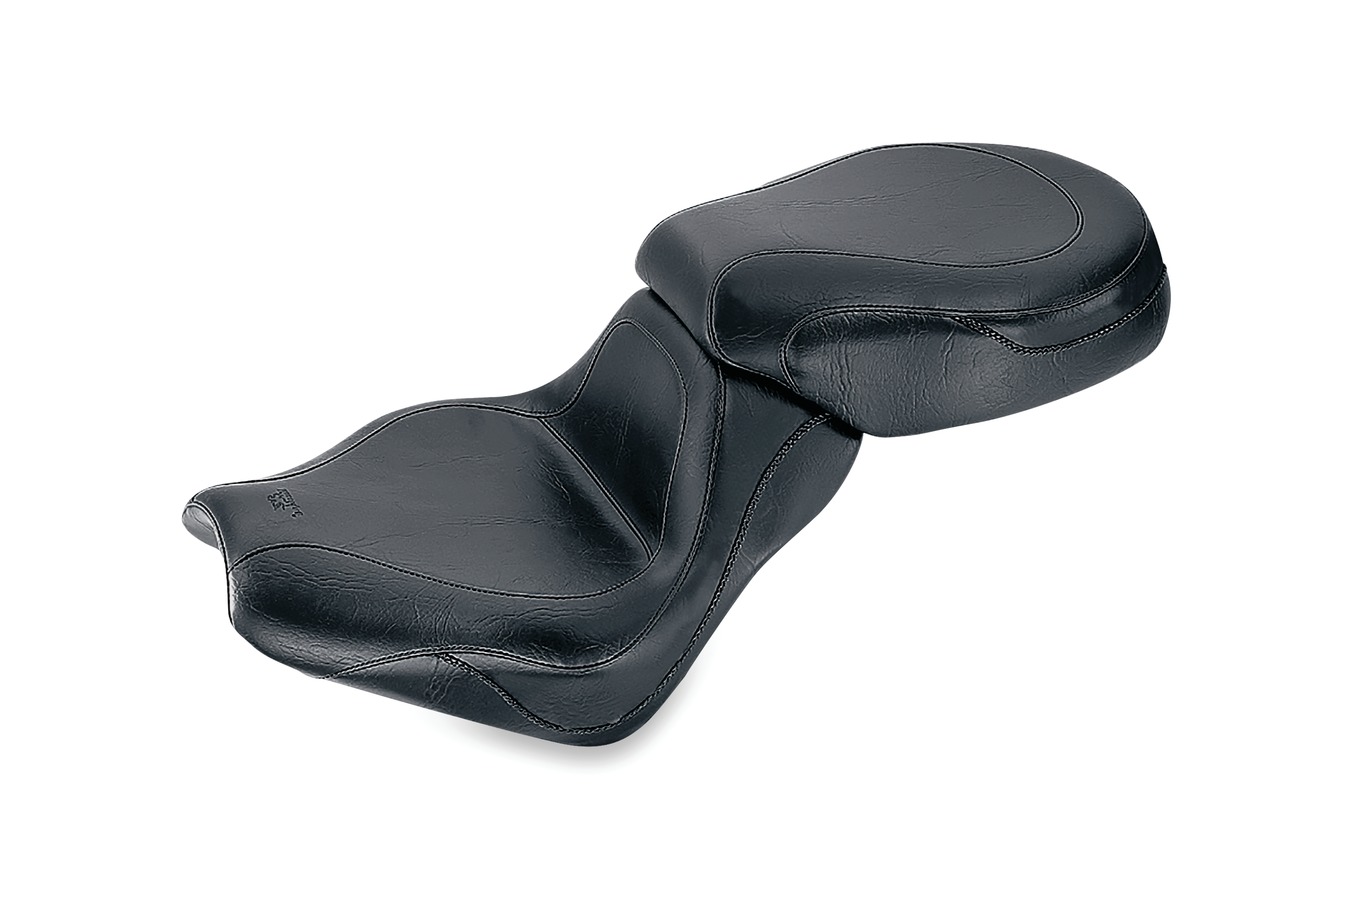 Sport Touring Two-Piece Seat for Honda VTX1300C 2004-